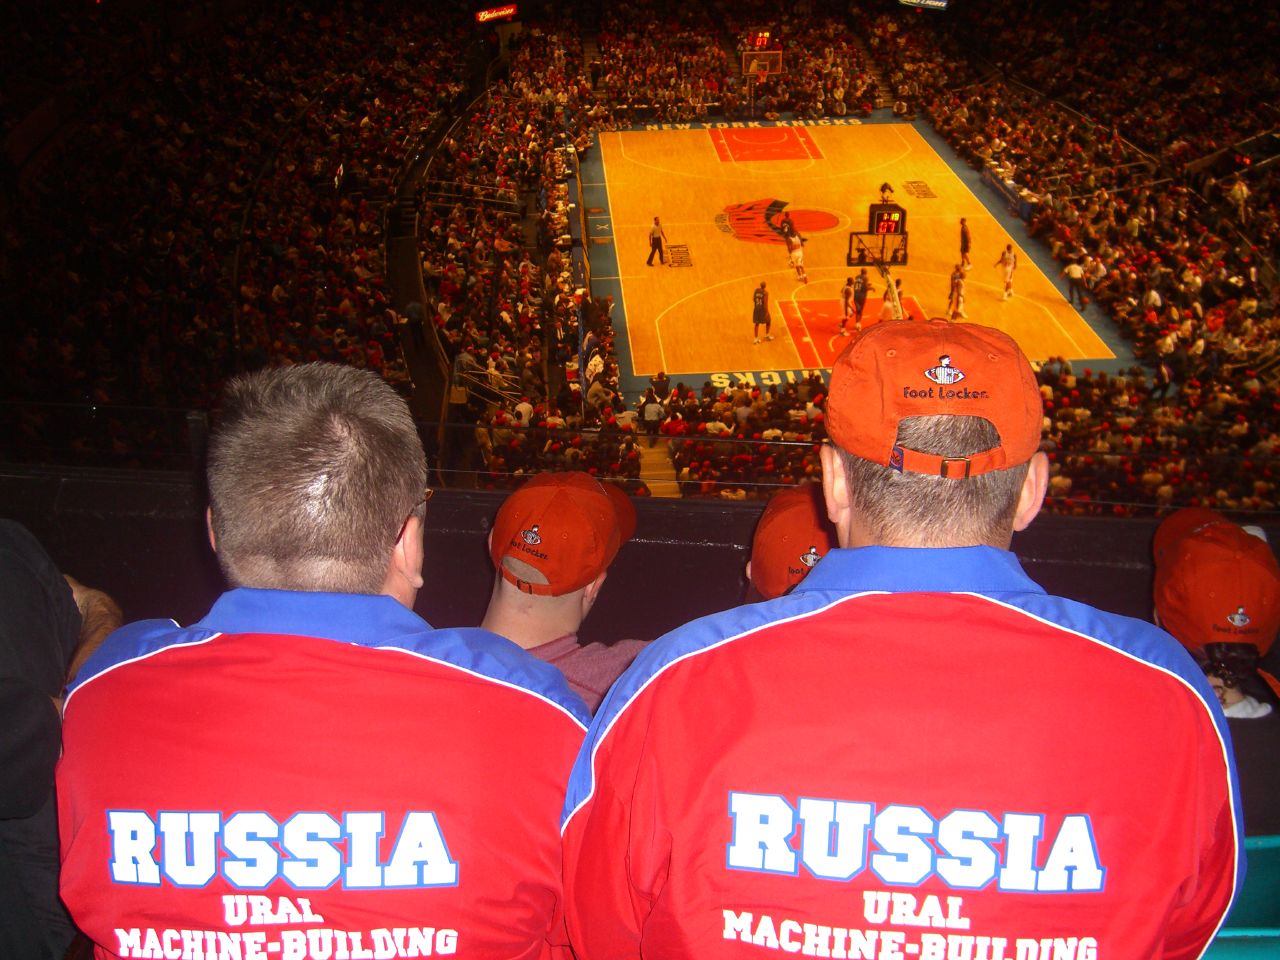 two men with red hats are sitting in the stands at a stadium